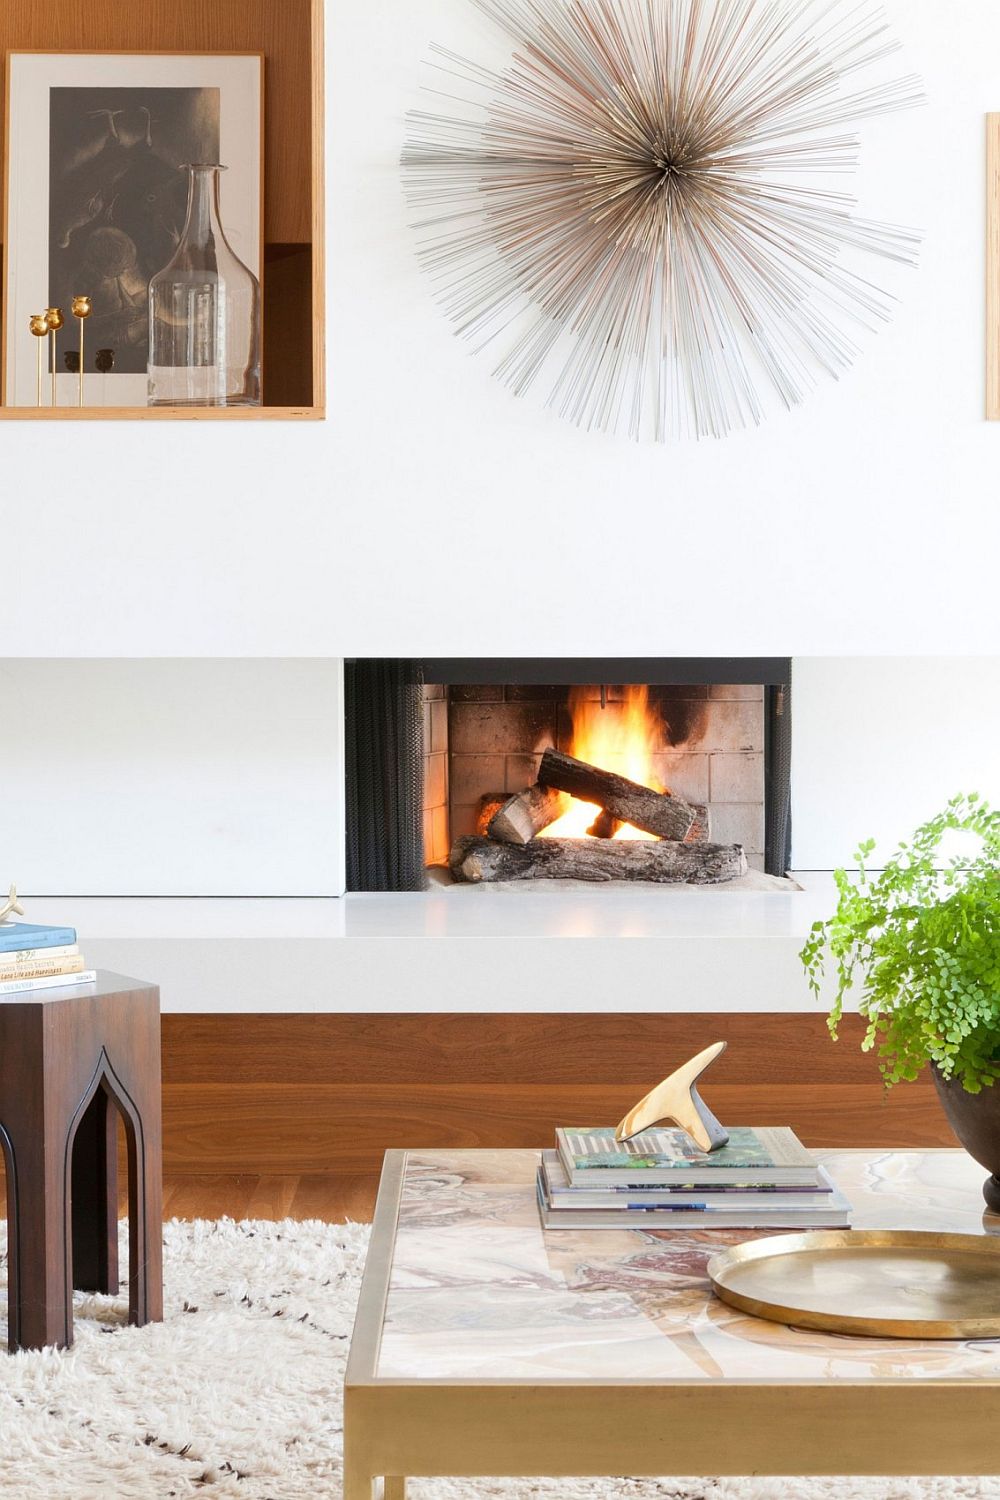 Fireplace inside the living room adds a cozy, contemporary focal point